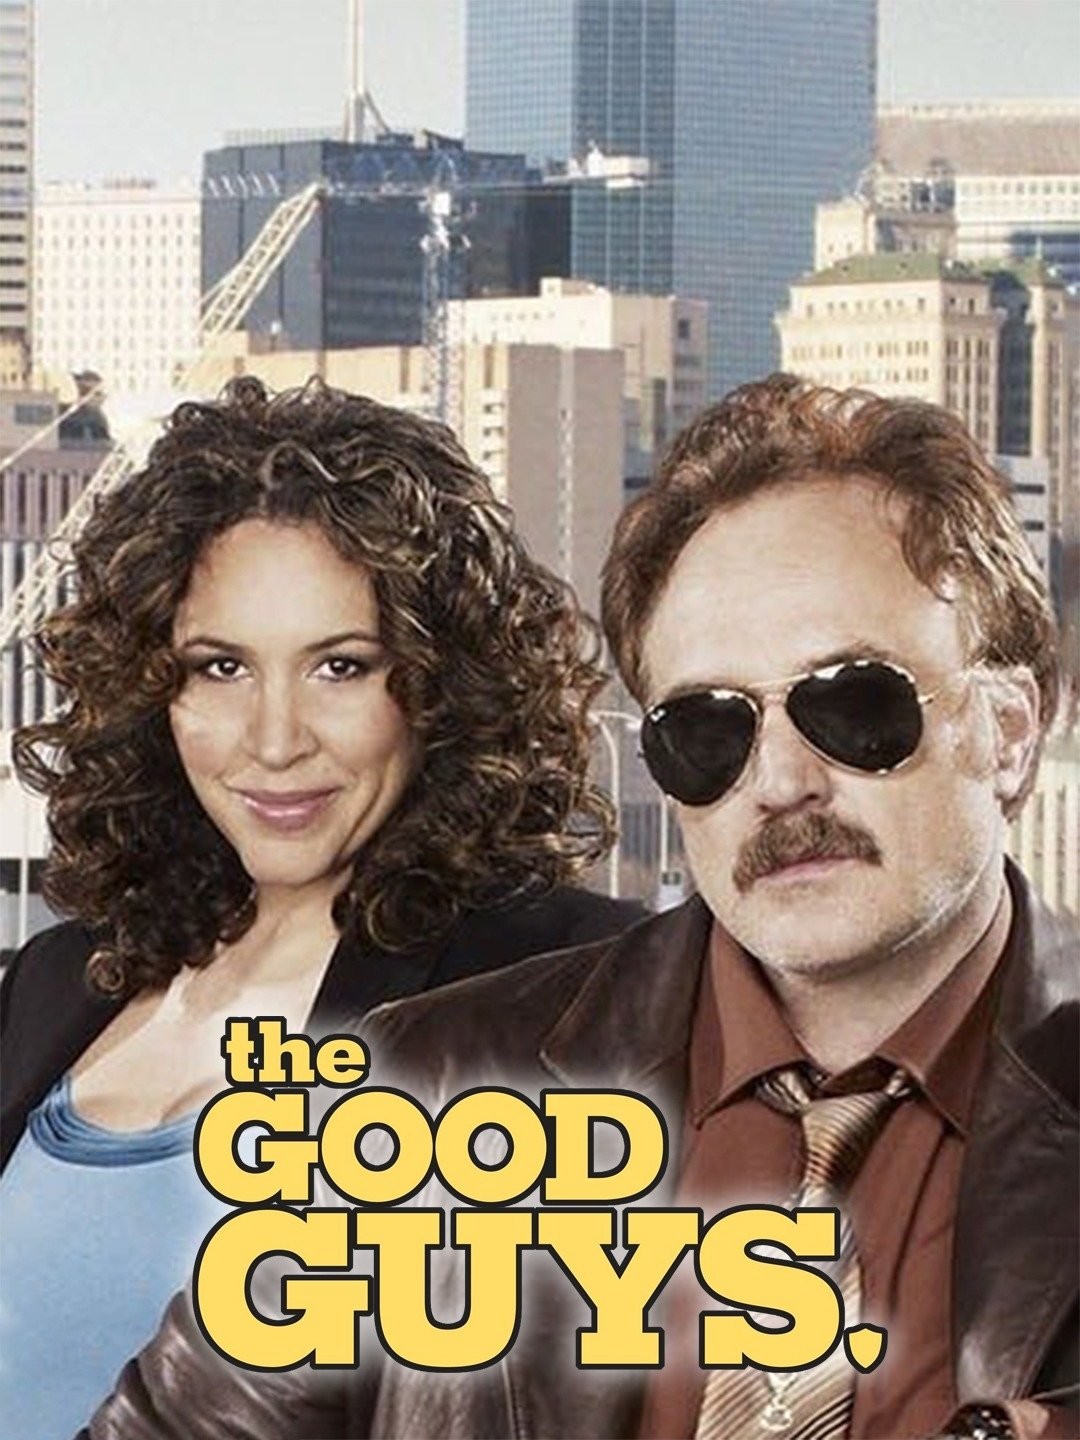 The Good/Bad and Bad/Good Guys of TV in 2012